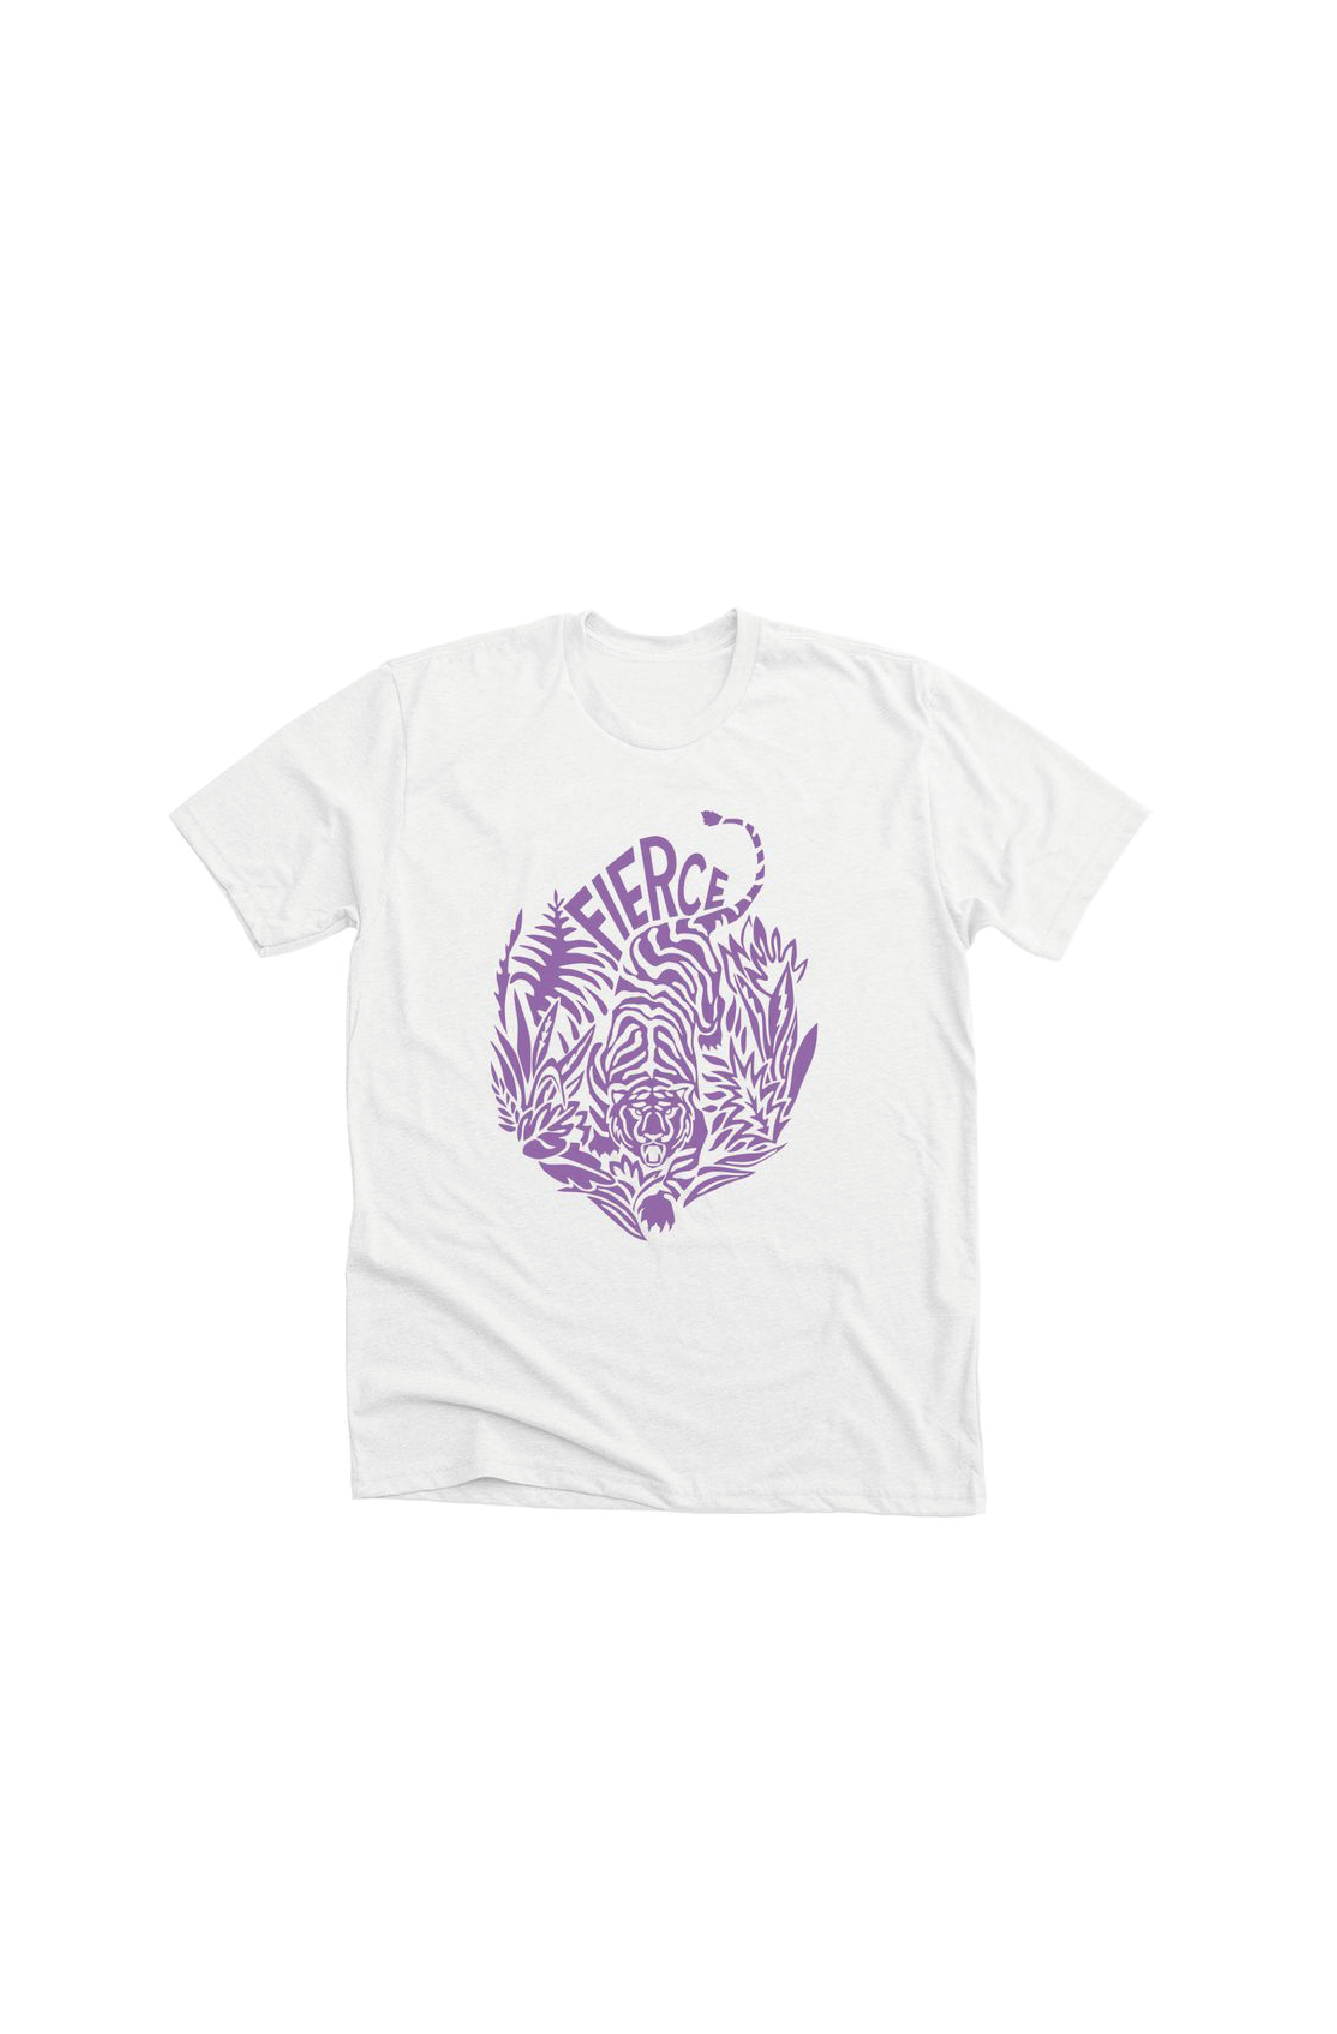 White unisex t-shirt with a tiger printed on the front in colour lilac